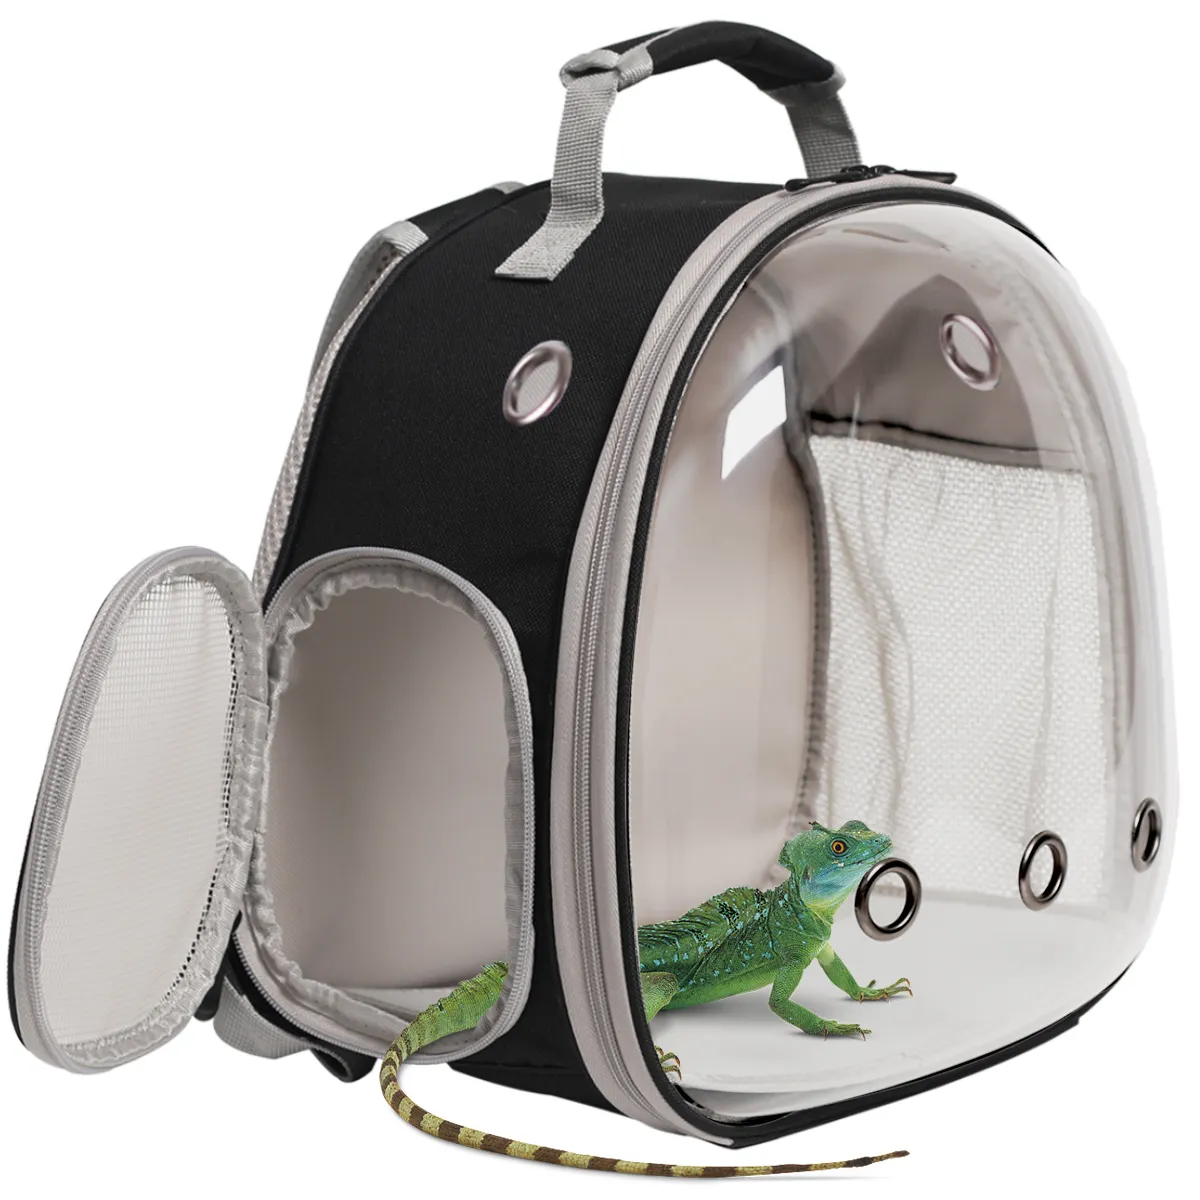 Carrier Bearded Dragon OEM Transport Pouch Carrier Bag Pet Carry Bag For Small Animals Guinea Pig Chinchilla Squirrel Bunny Bear